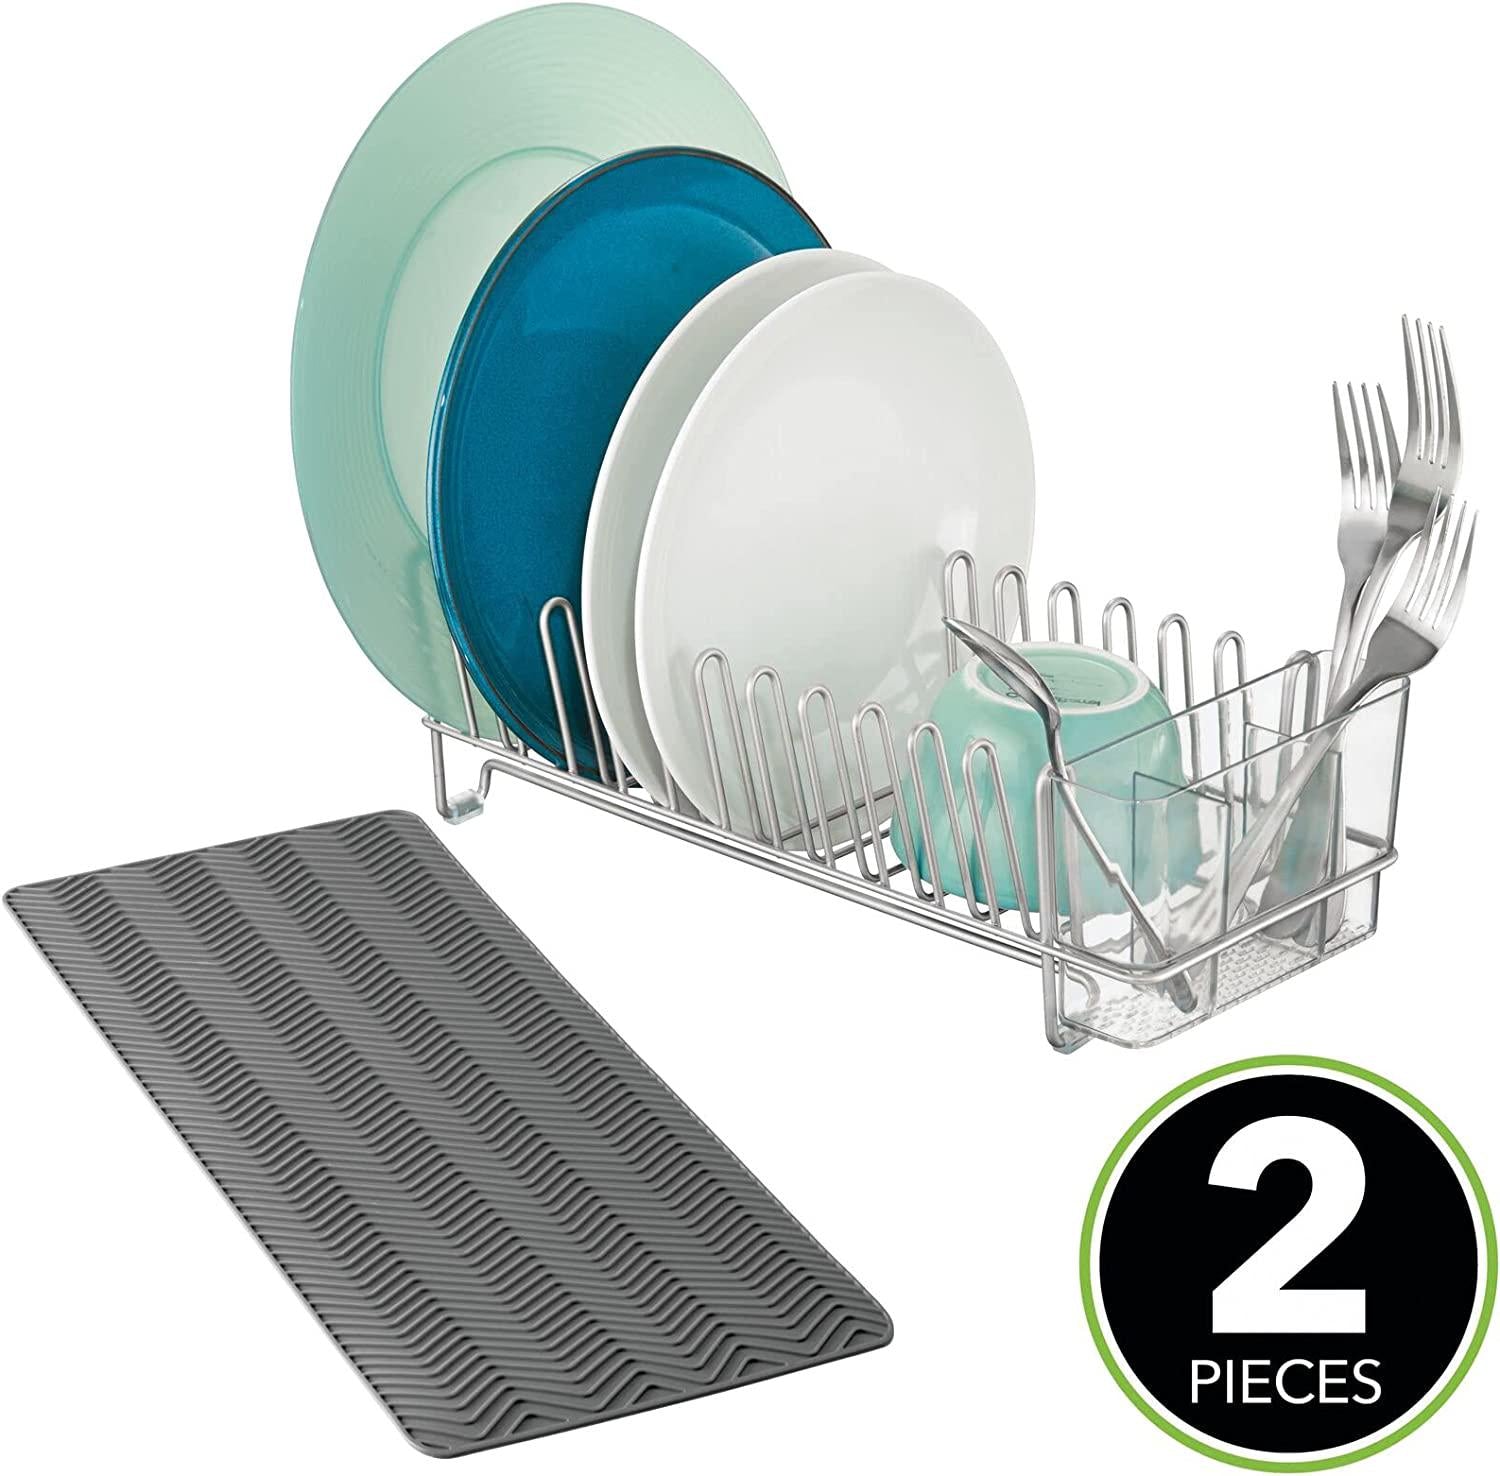 mDesign, mDesign Steel Sink Dish Drying Rack/Dish Drainer Storage Organizer w/Wire Drainer, Drying Mat for Kitchen Counter, Easy Drain/Dry Dishes, Plate, Utensil - Concerto Collection, Set of 2 - Chrome/Gray